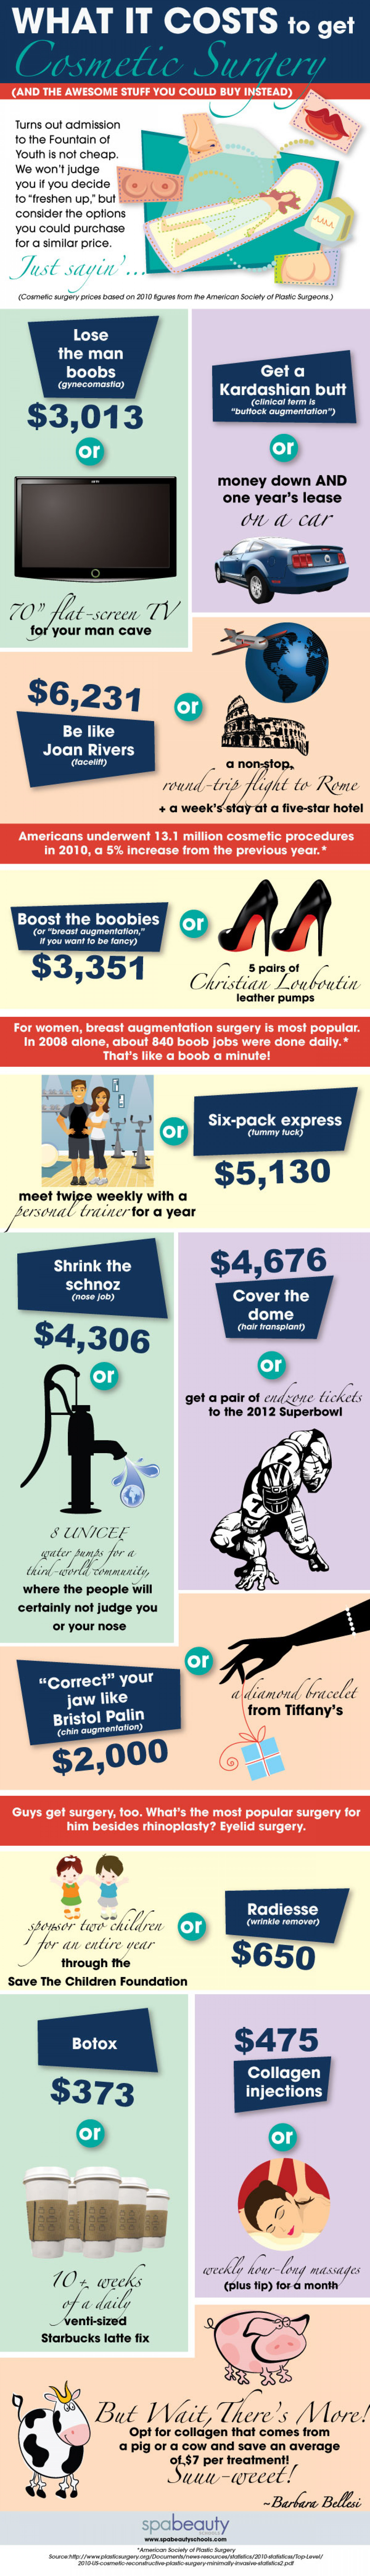 What It Costs to Get Cosmetic Surgery Infographic